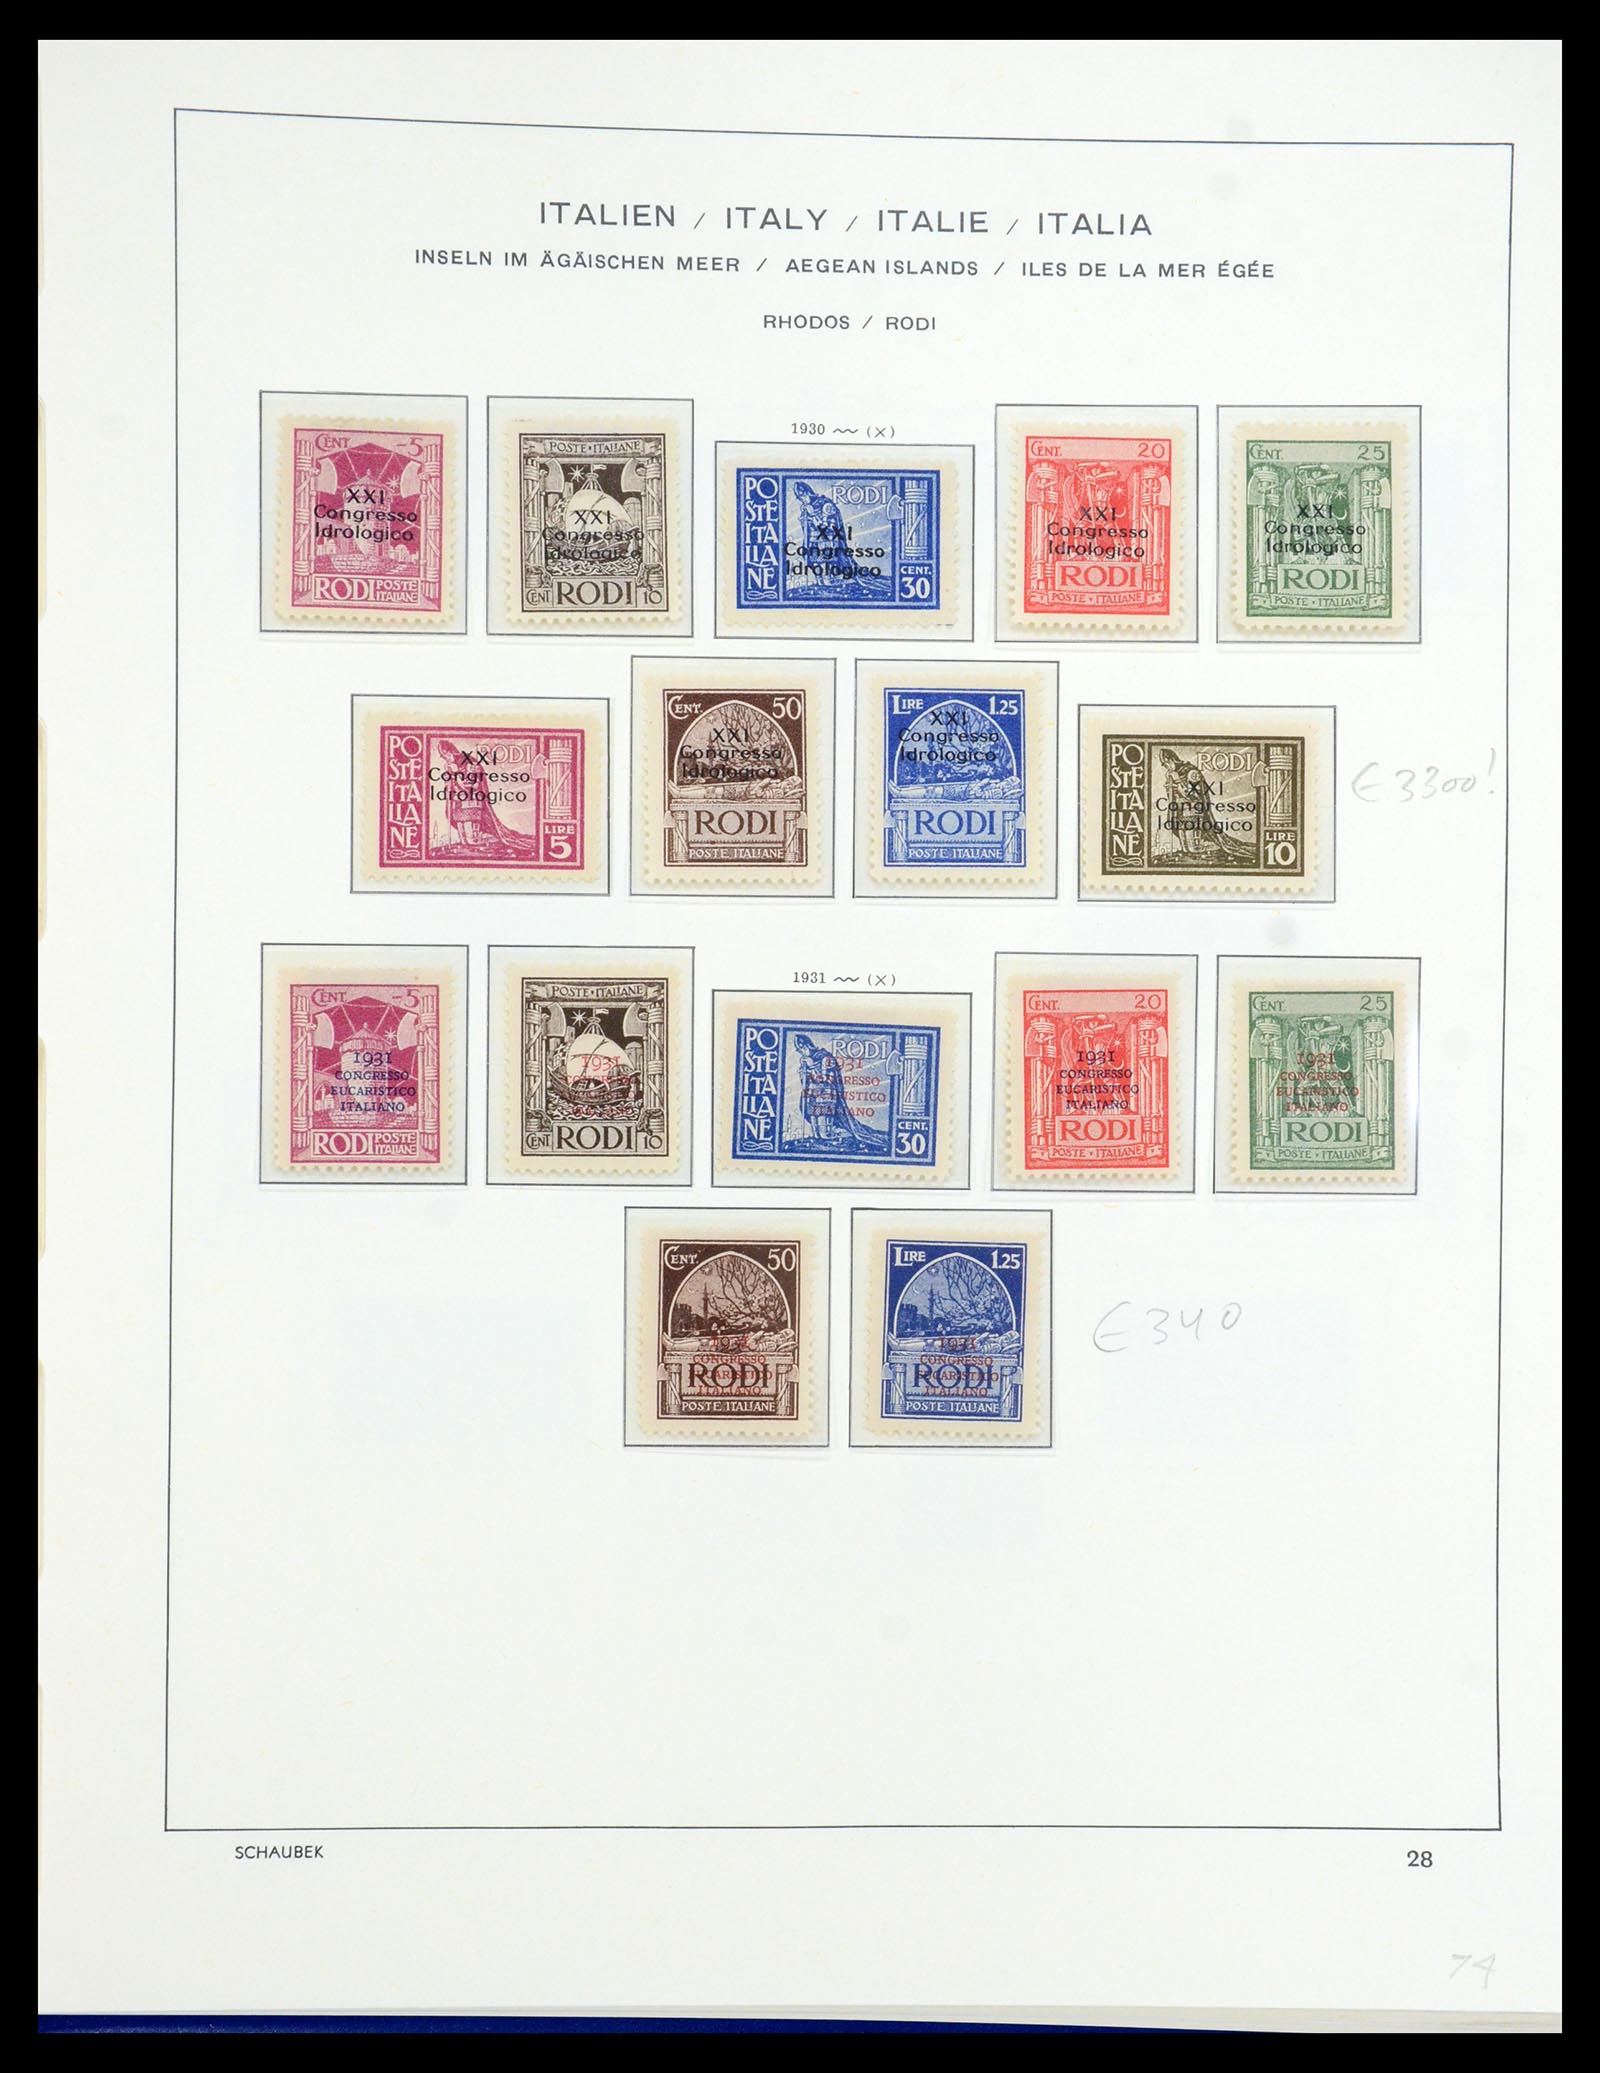 36181 038 - Stamp collection 36181 Italian Aegean Islands 1912-1941.